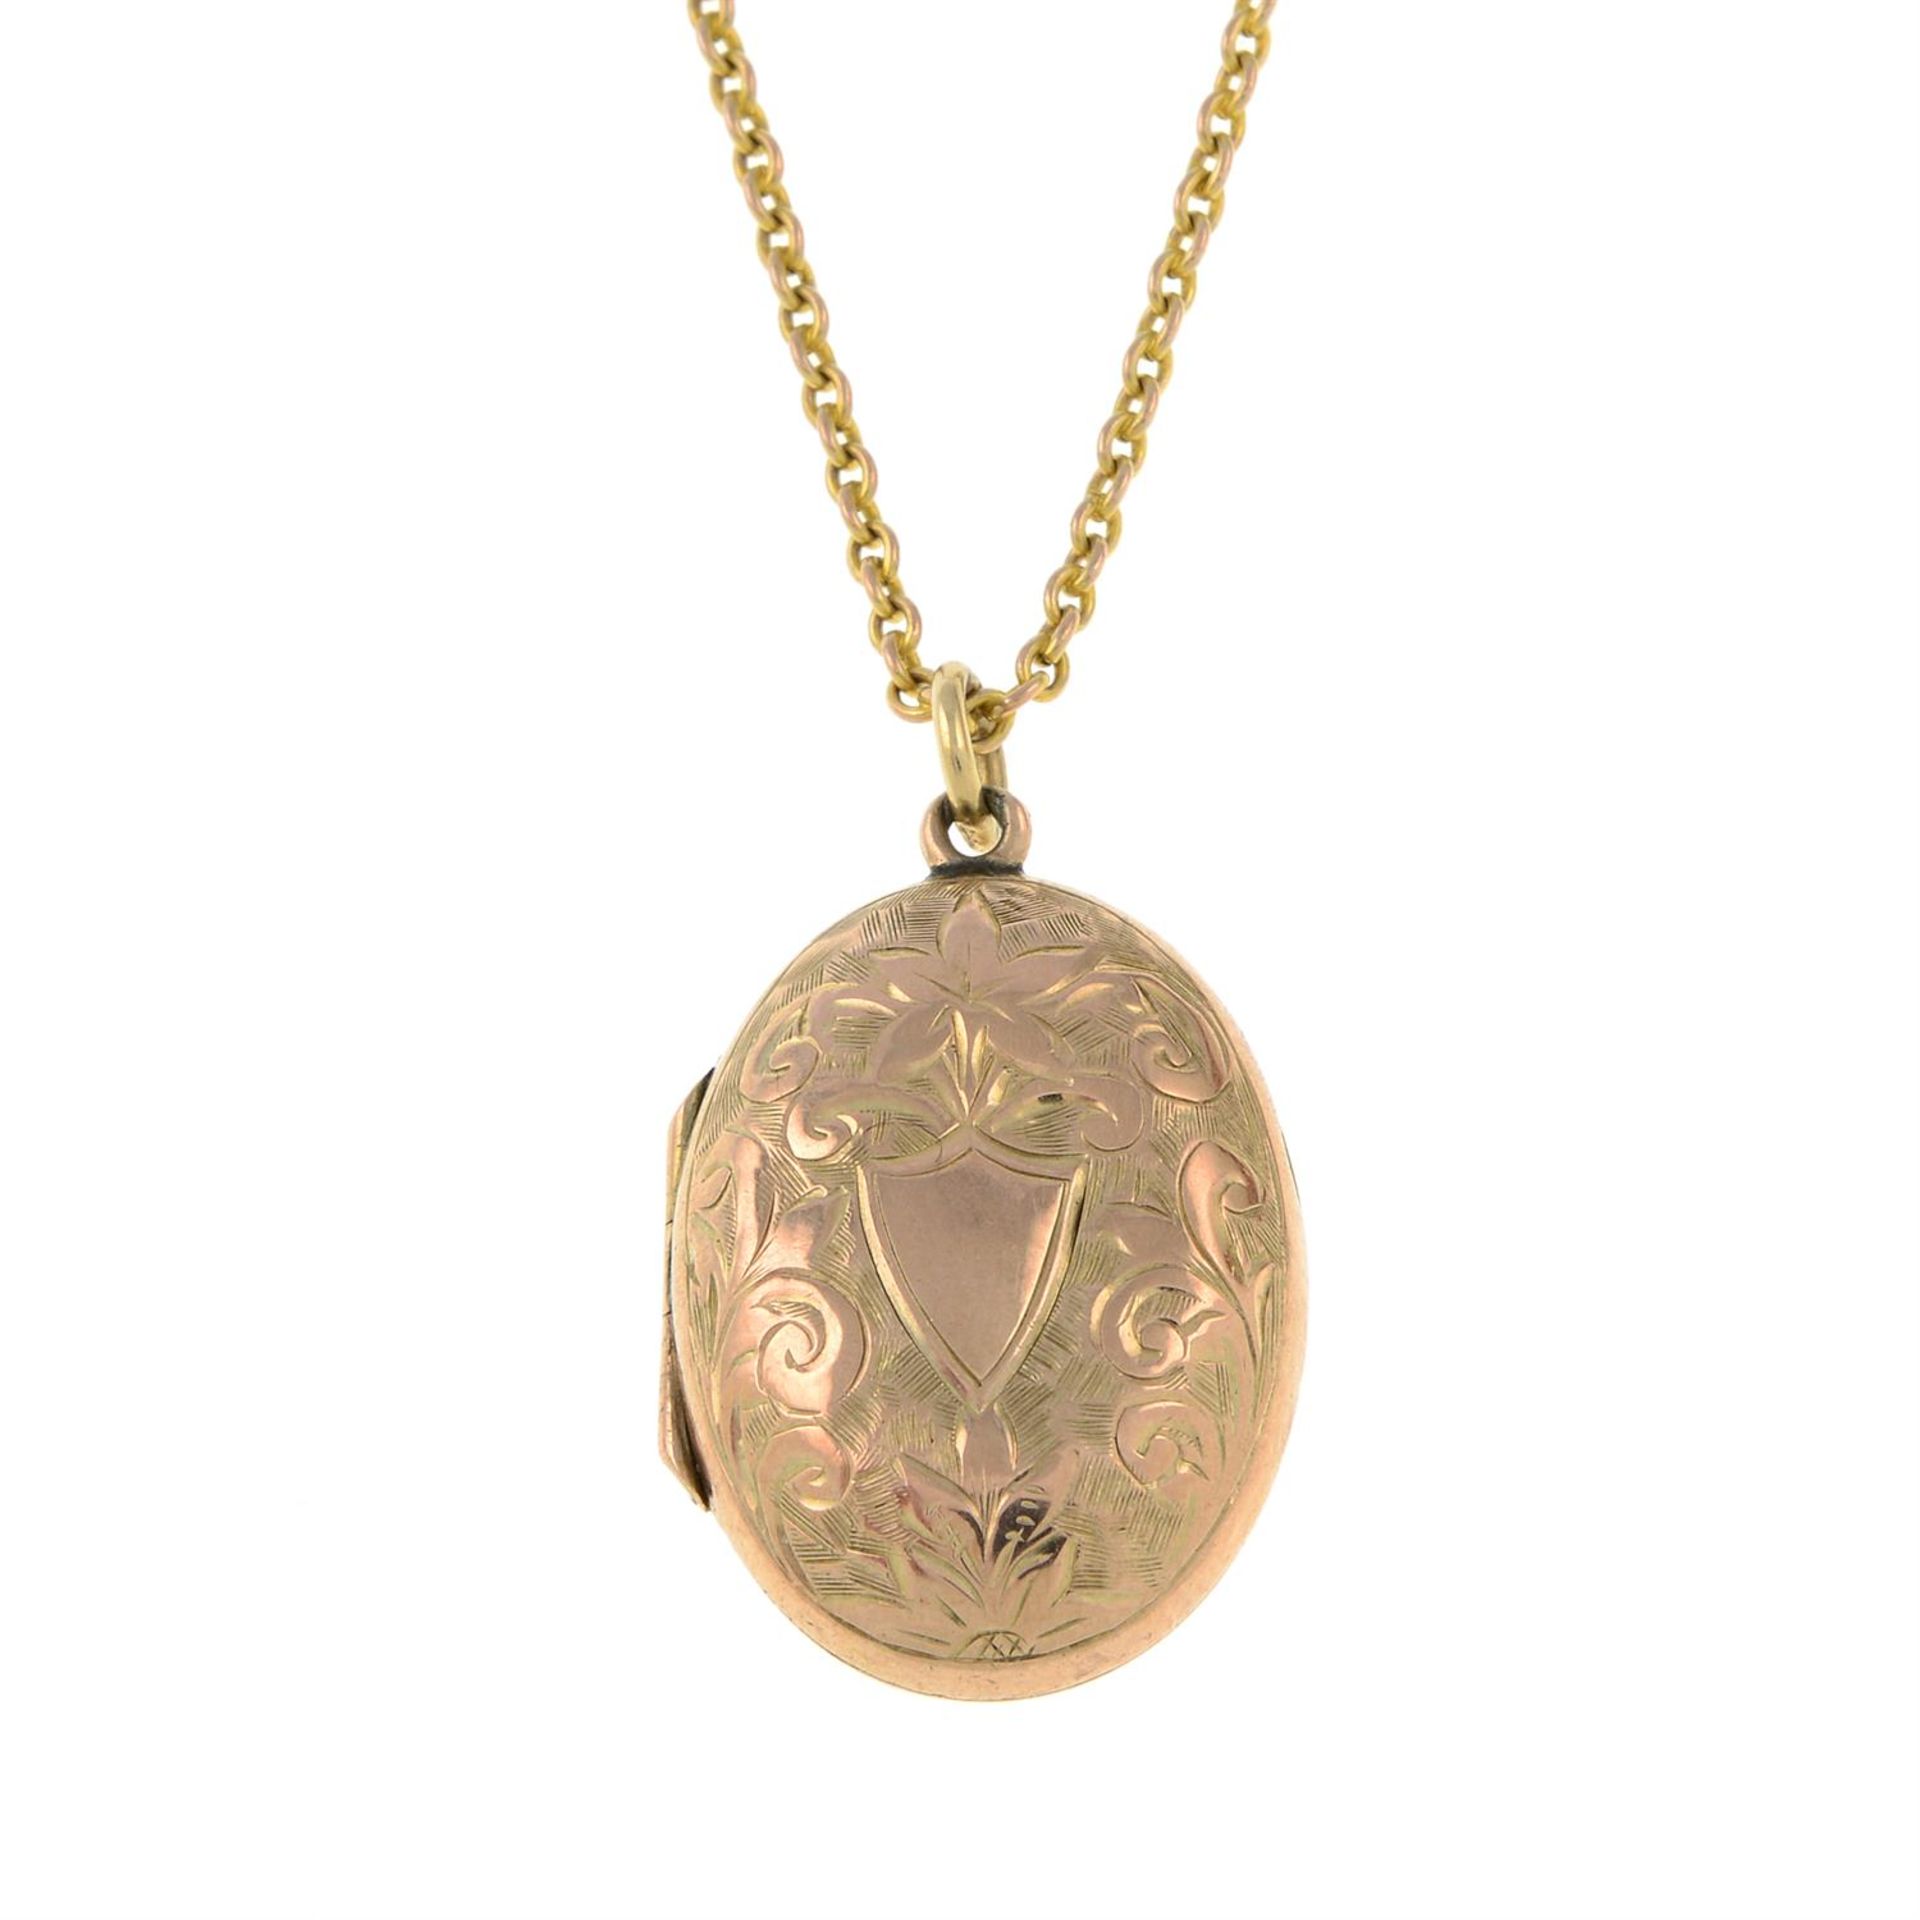 An early 20th century 9ct gold locket pendant, with chain.